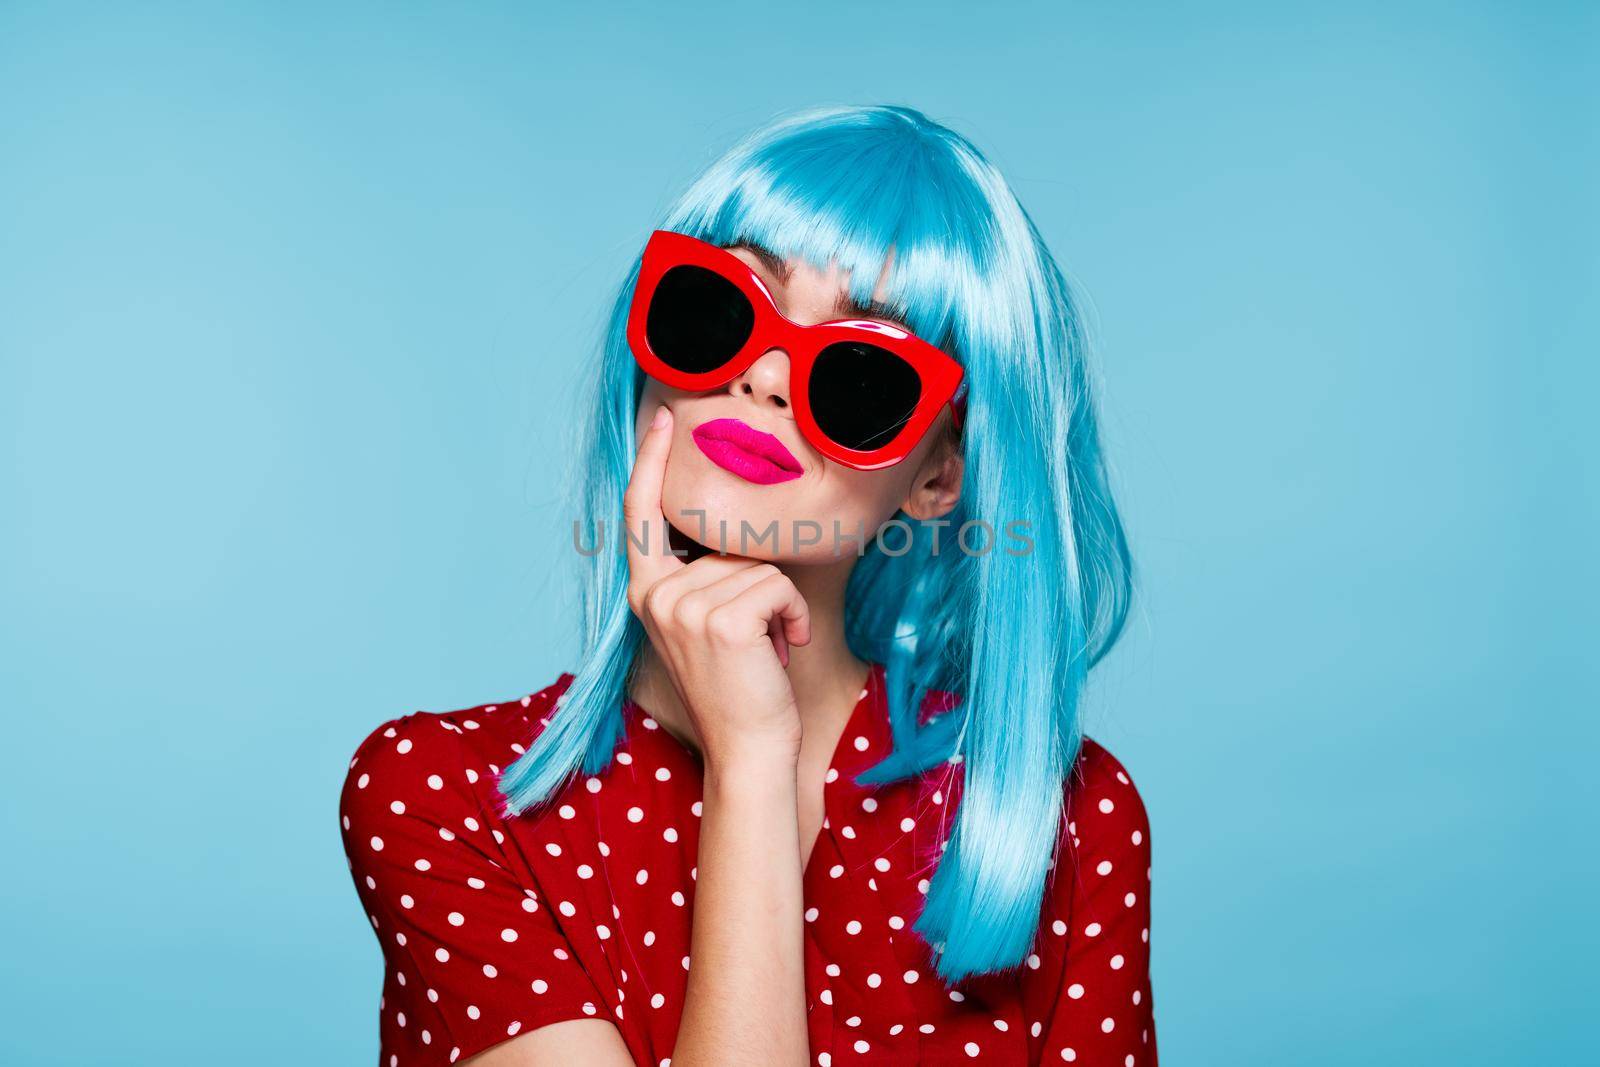 beautiful woman in blue wig sunglasses Glamor close-up. High quality photo